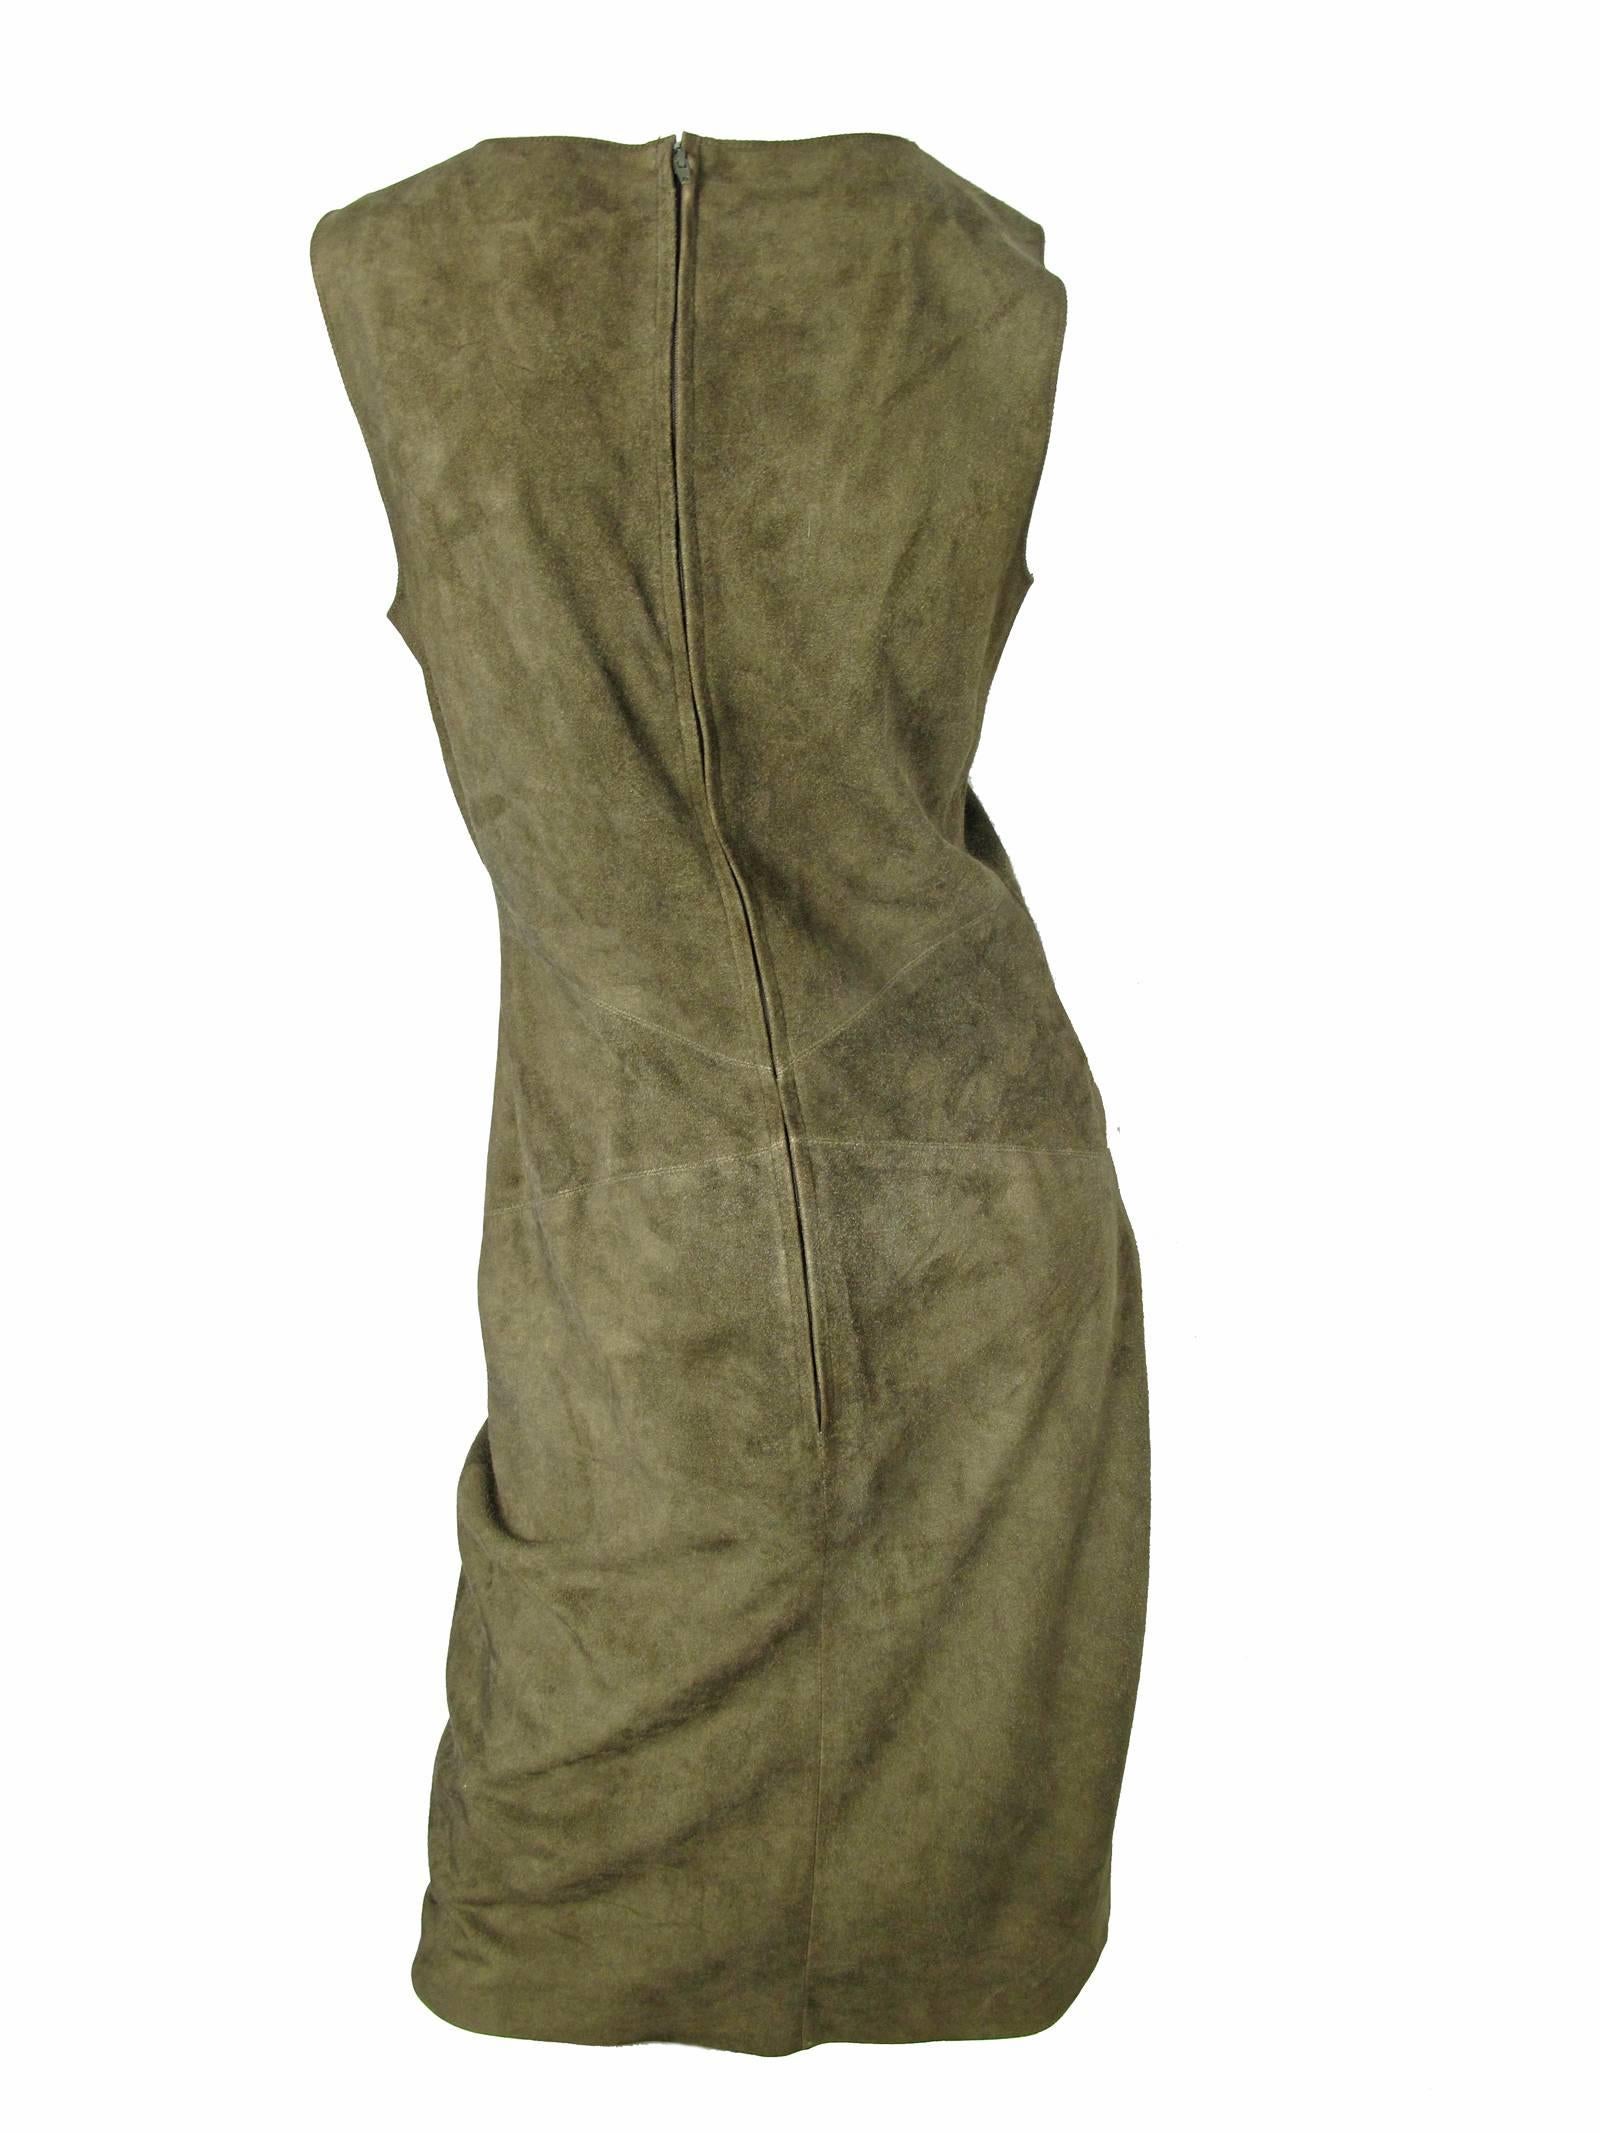 Fall 1999 green Chanel sleeveless soft suede (goatskin) dress with brass logo charm at front waist and back concealed zip closure. Lined the silk. Condition: Good, previously worn and shows all over wear.   Size 40 / US 8 - 10 ( mannequin is a size